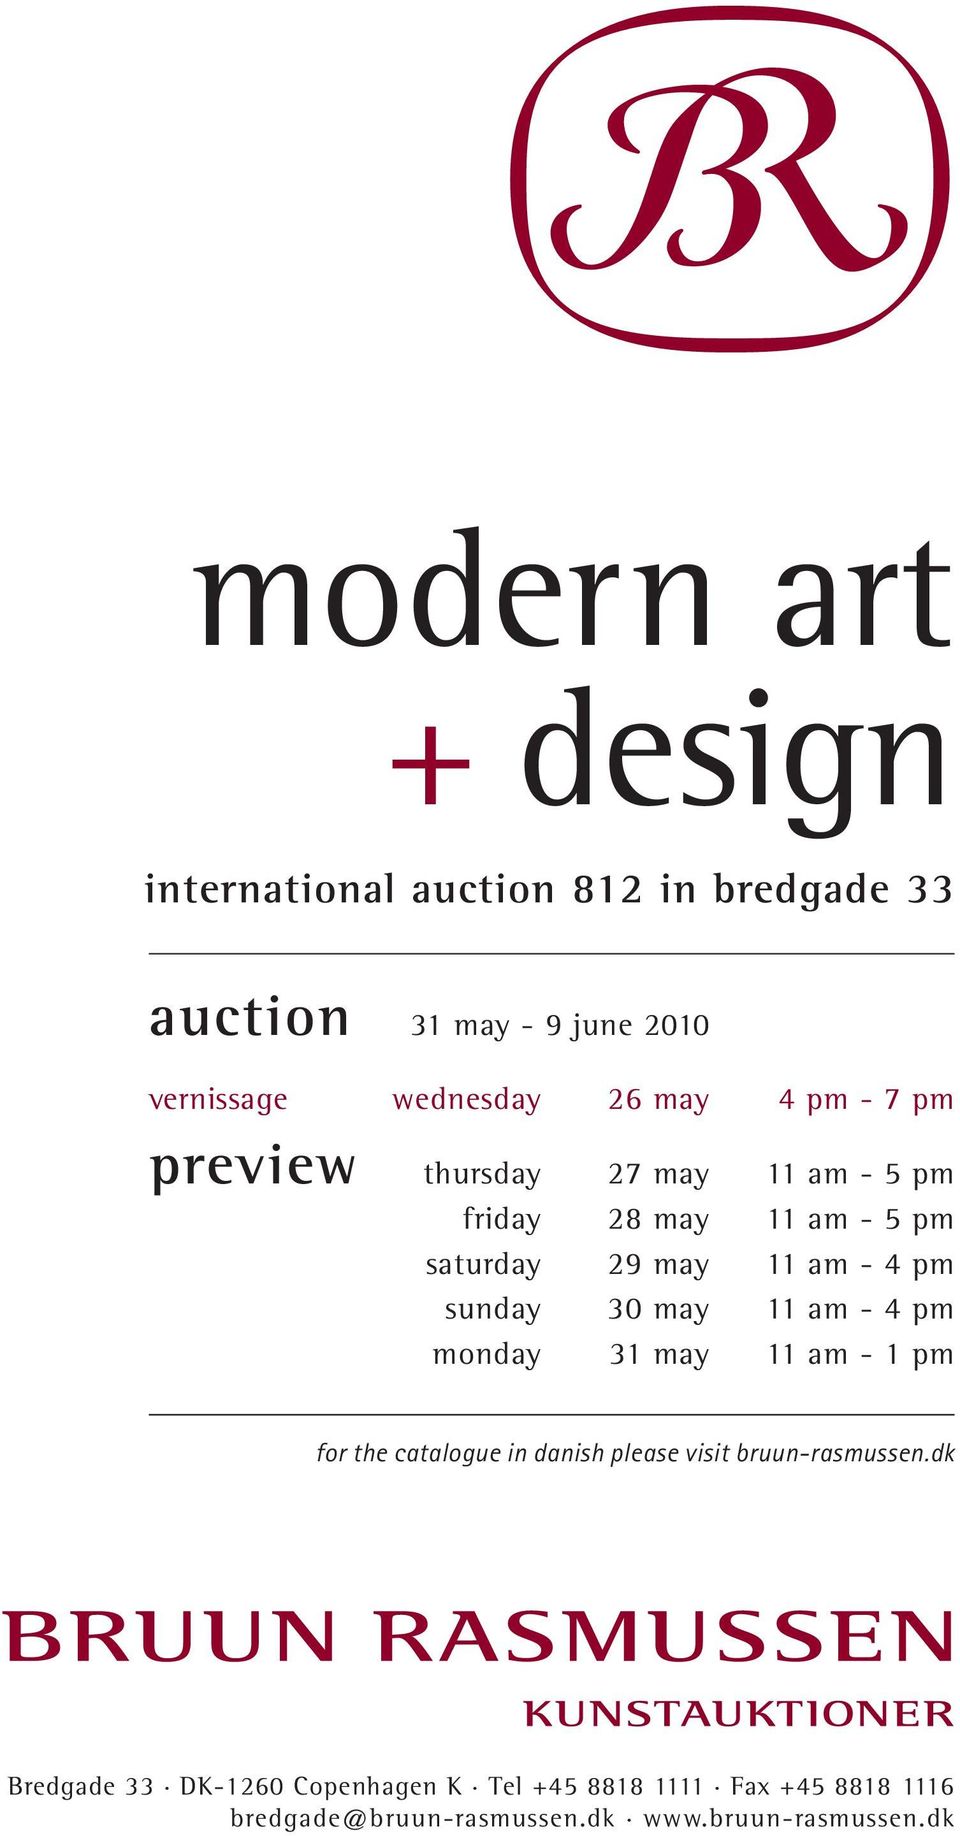 sunday 30 may 11 am - 4 pm monday 31 may 11 am - 1 pm for the catalogue in danish please visit bruun-rasmussen.